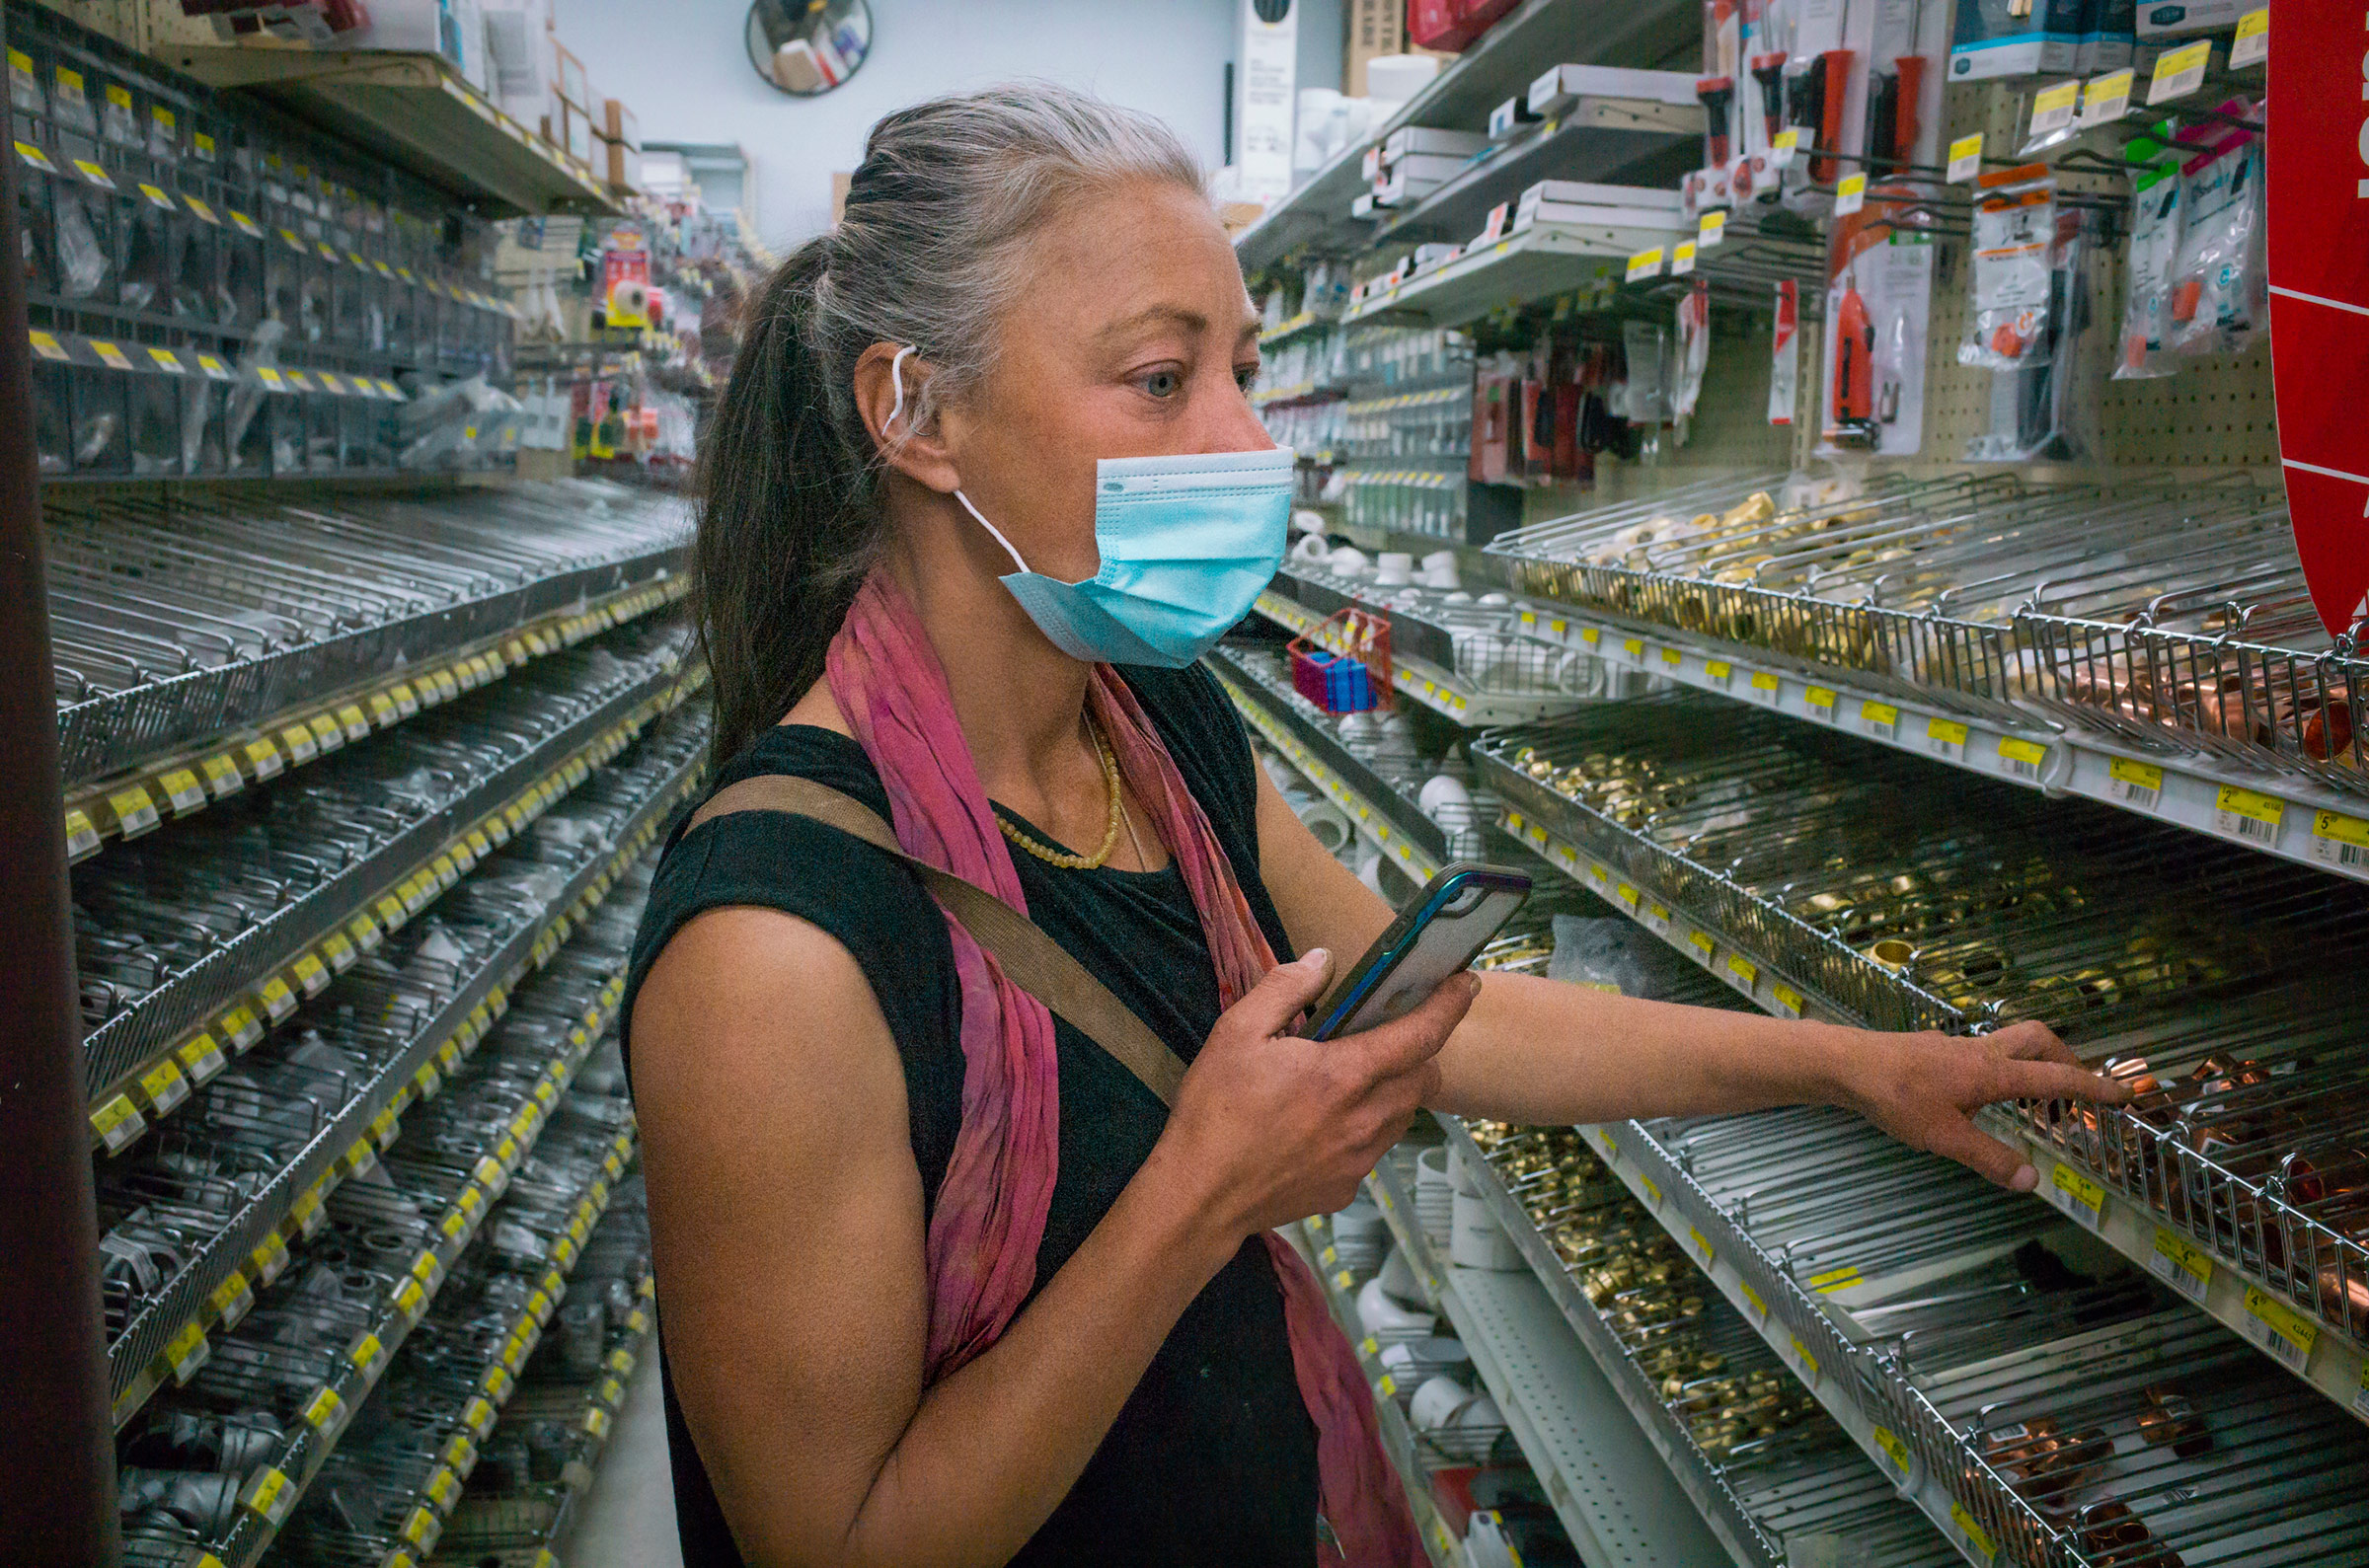 Paula looks for parts for a heater in a local hardware store on March 3. (Nina Riggio for TIME)